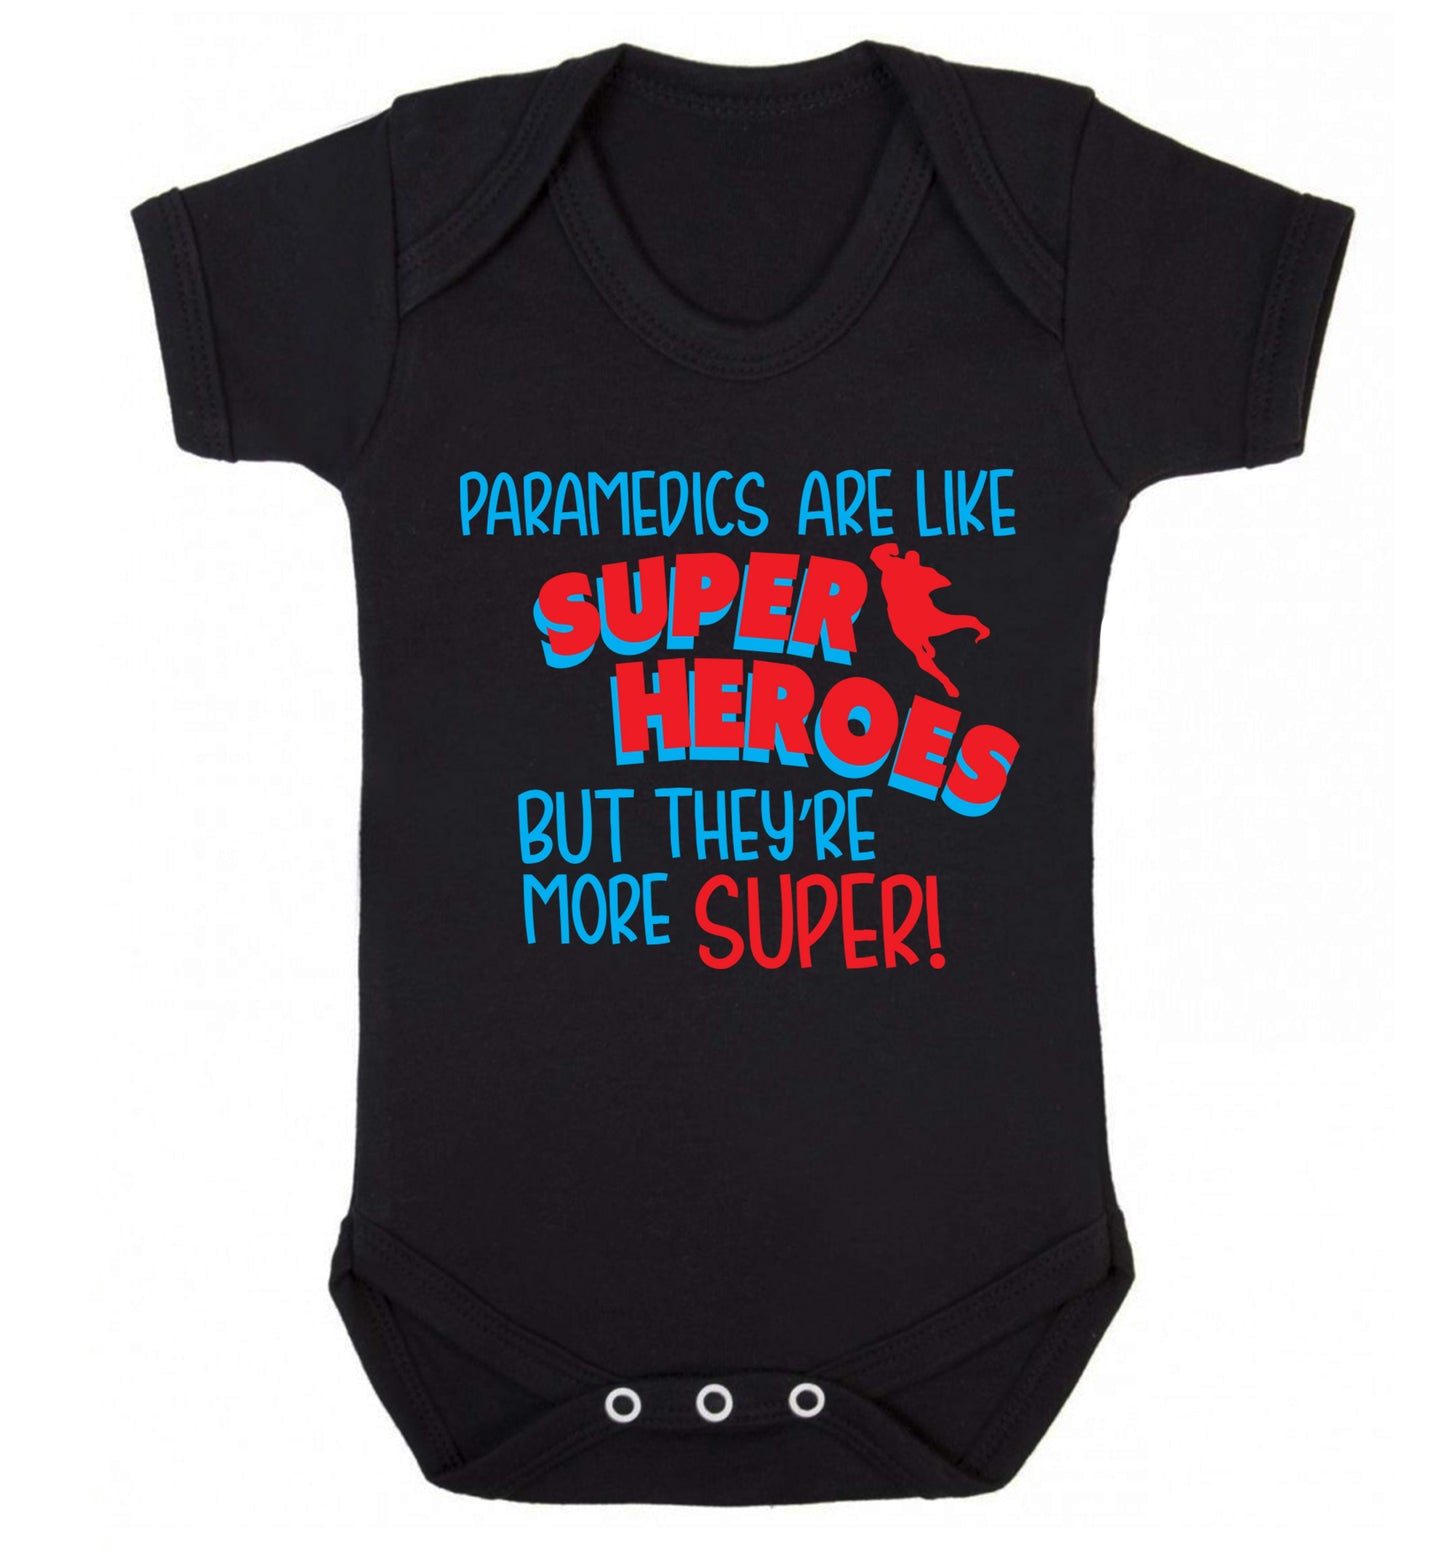 Paramedics are like superheros but they're more super Baby Vest black 18-24 months